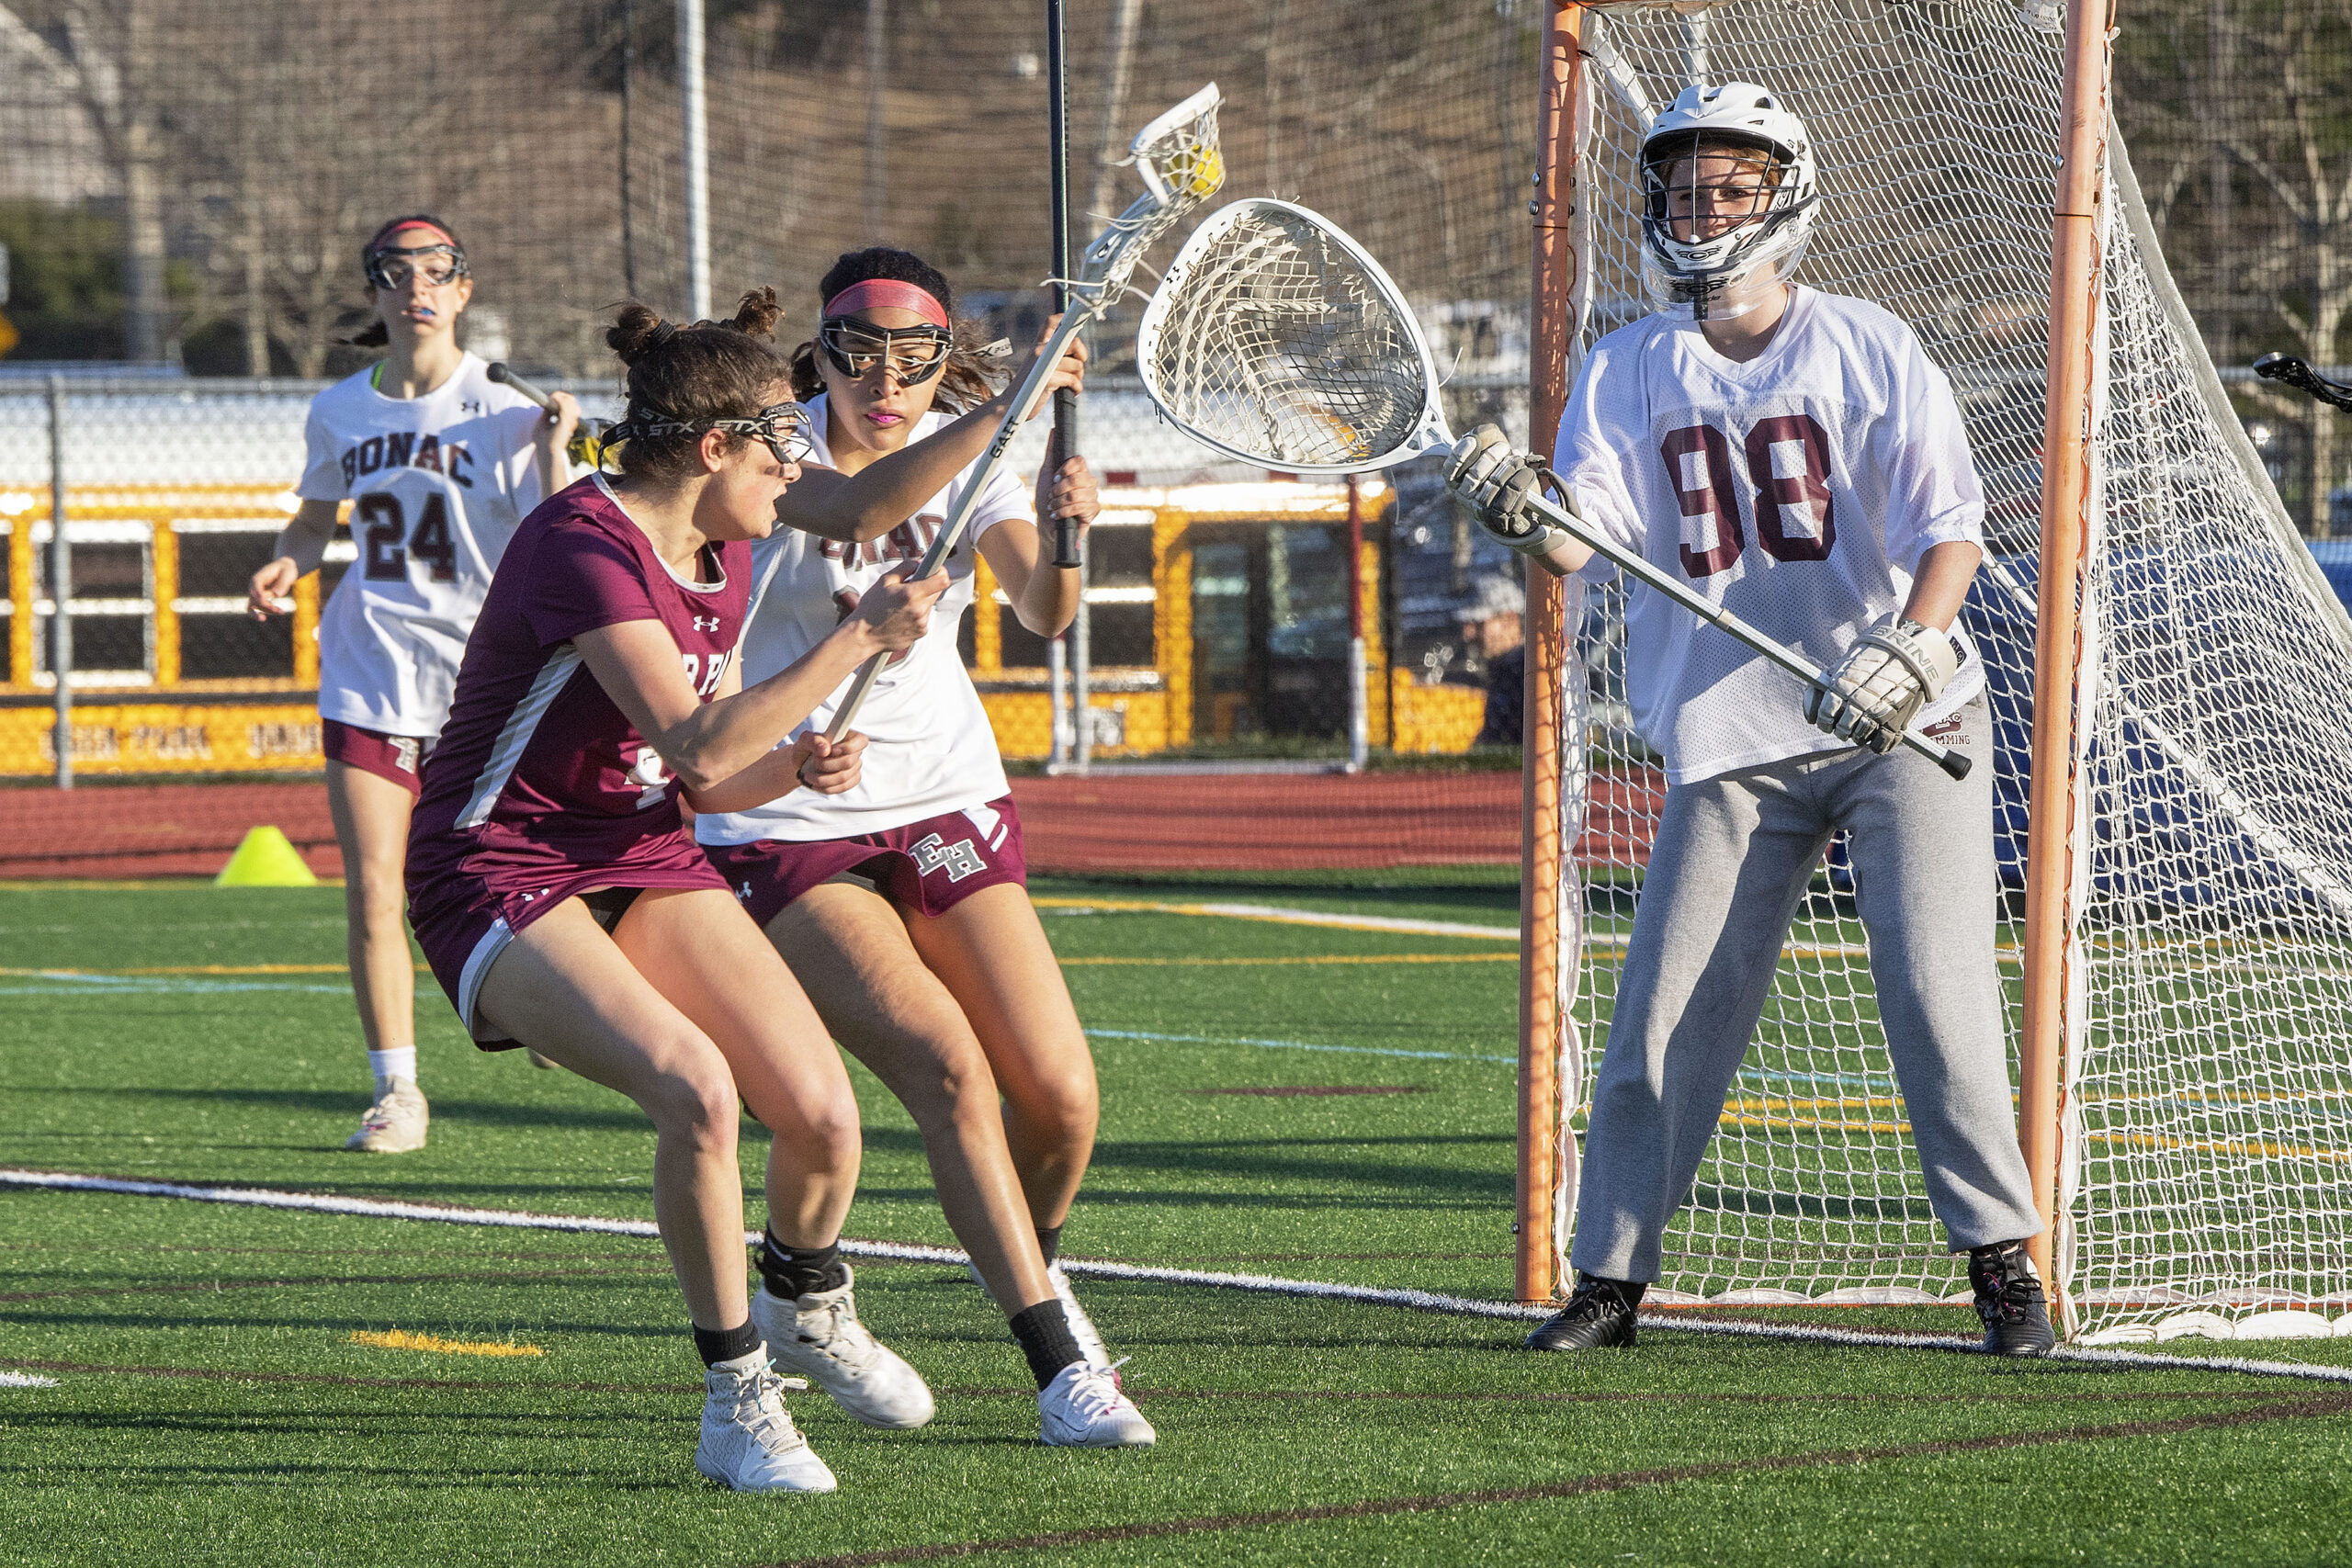 East Hampton senior Melanie Lugue defends against a Deer Park player with goalie Ruby Tyrrell backs her up.  Tyrrell got the start in goal after usual starting goalie Laura Calderon suffered a concussion in a game the day prior.   MICHAEL HELLER